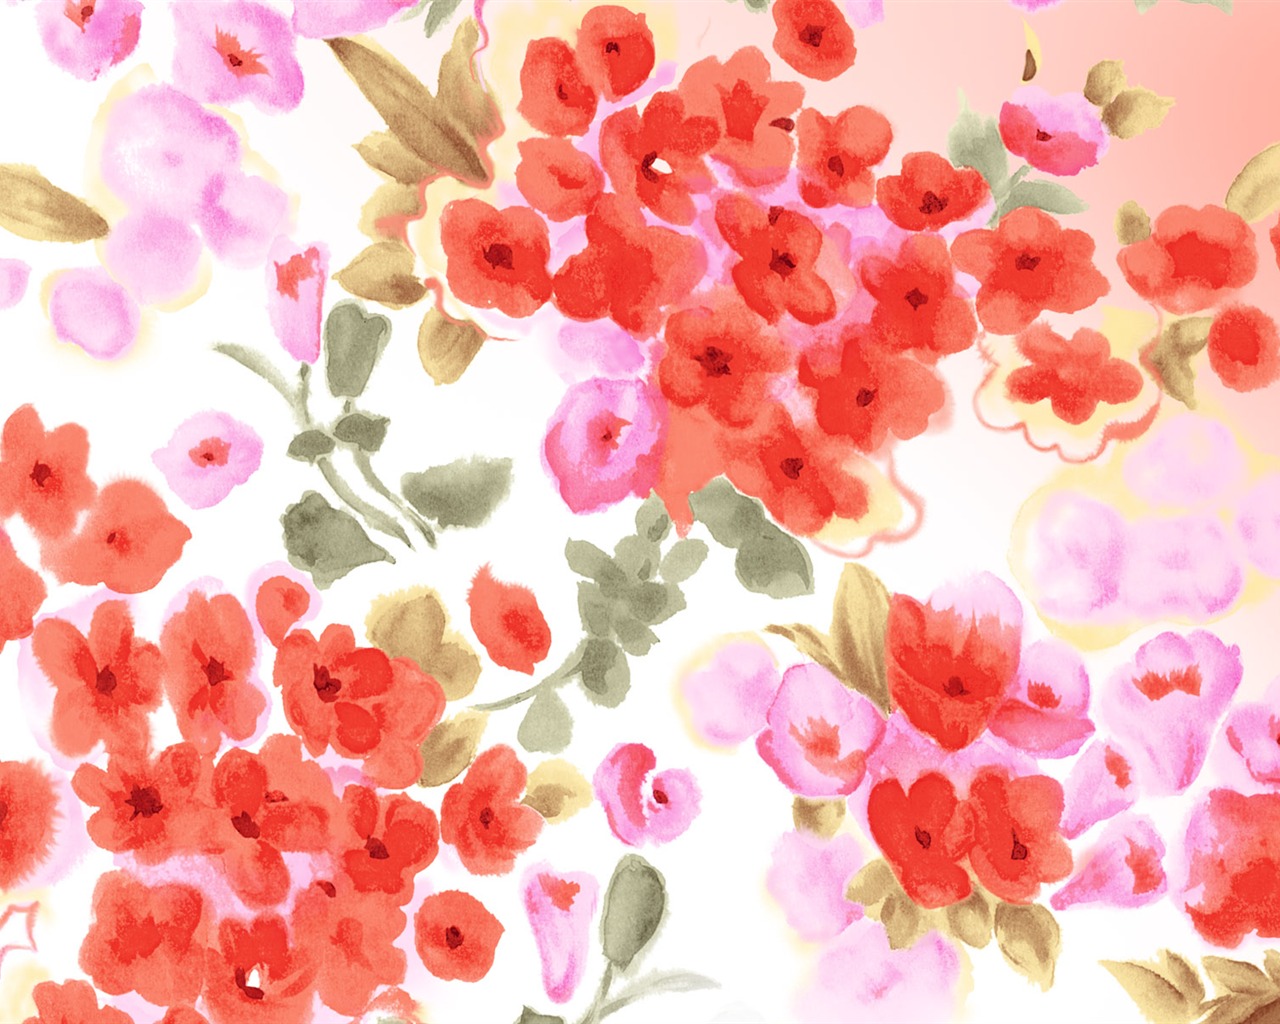 Synthetic Flower Wallpapers (2) #5 - 1280x1024